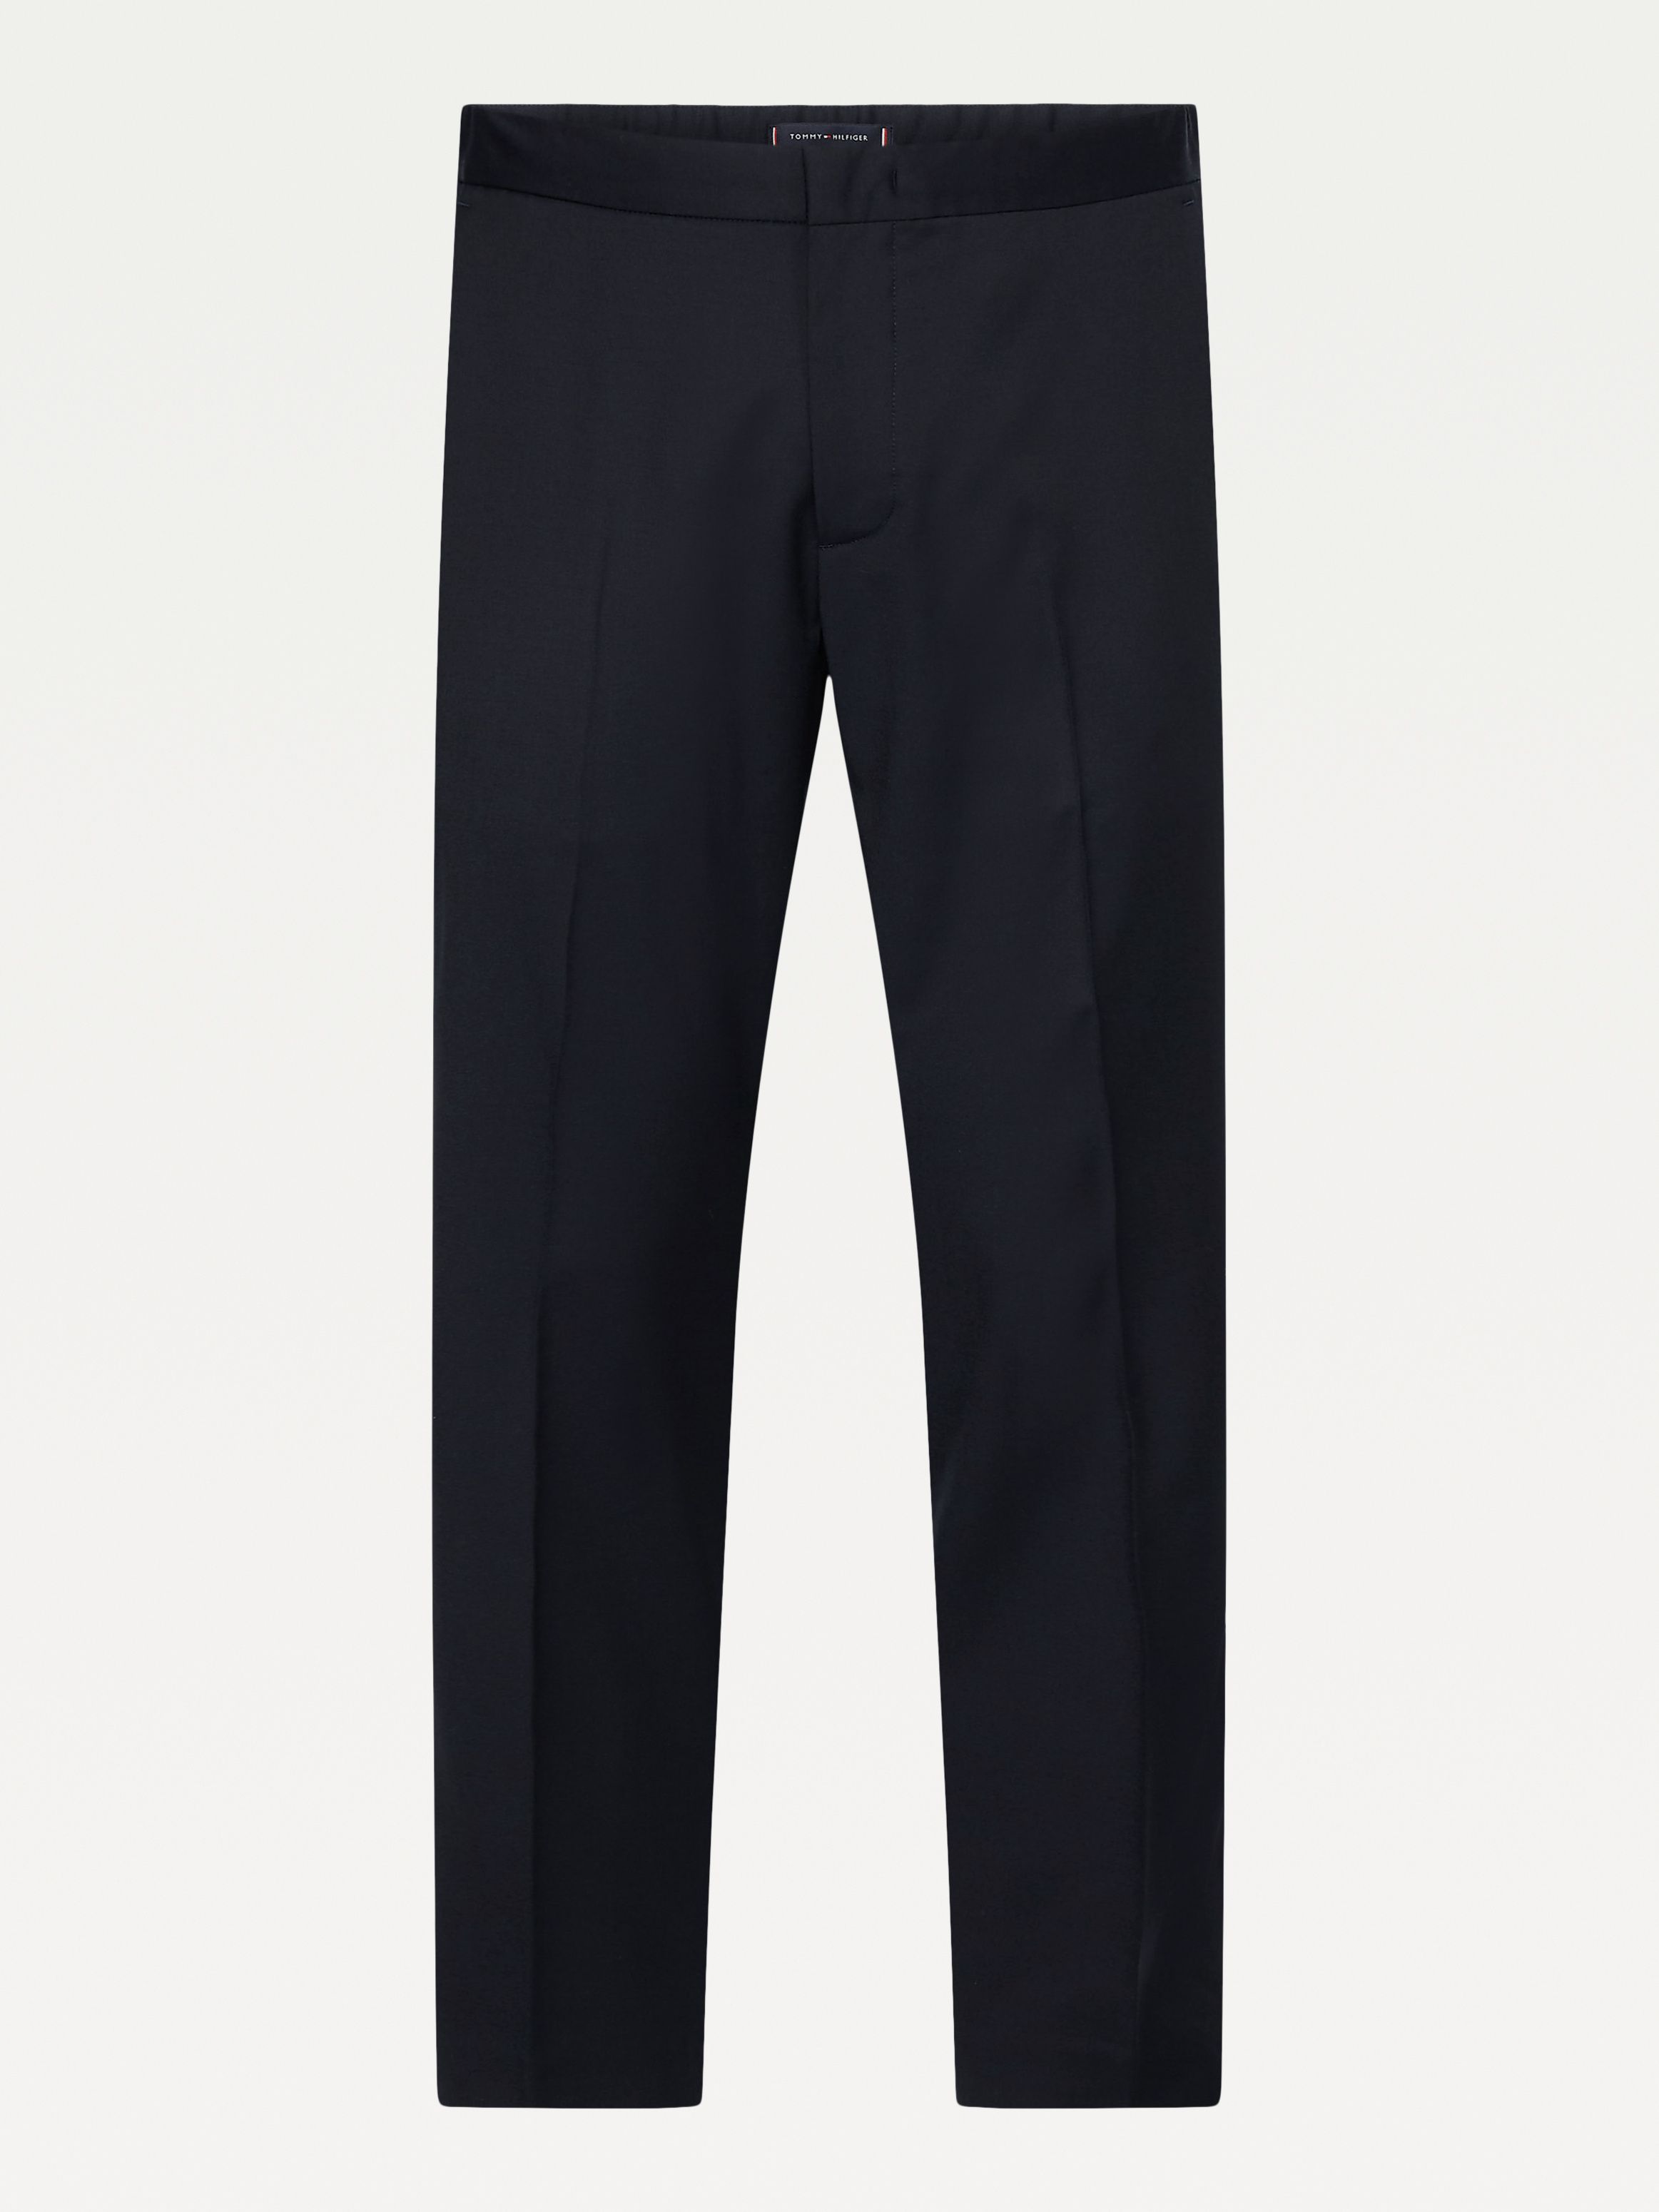 Elevated Technical Modern Chinos